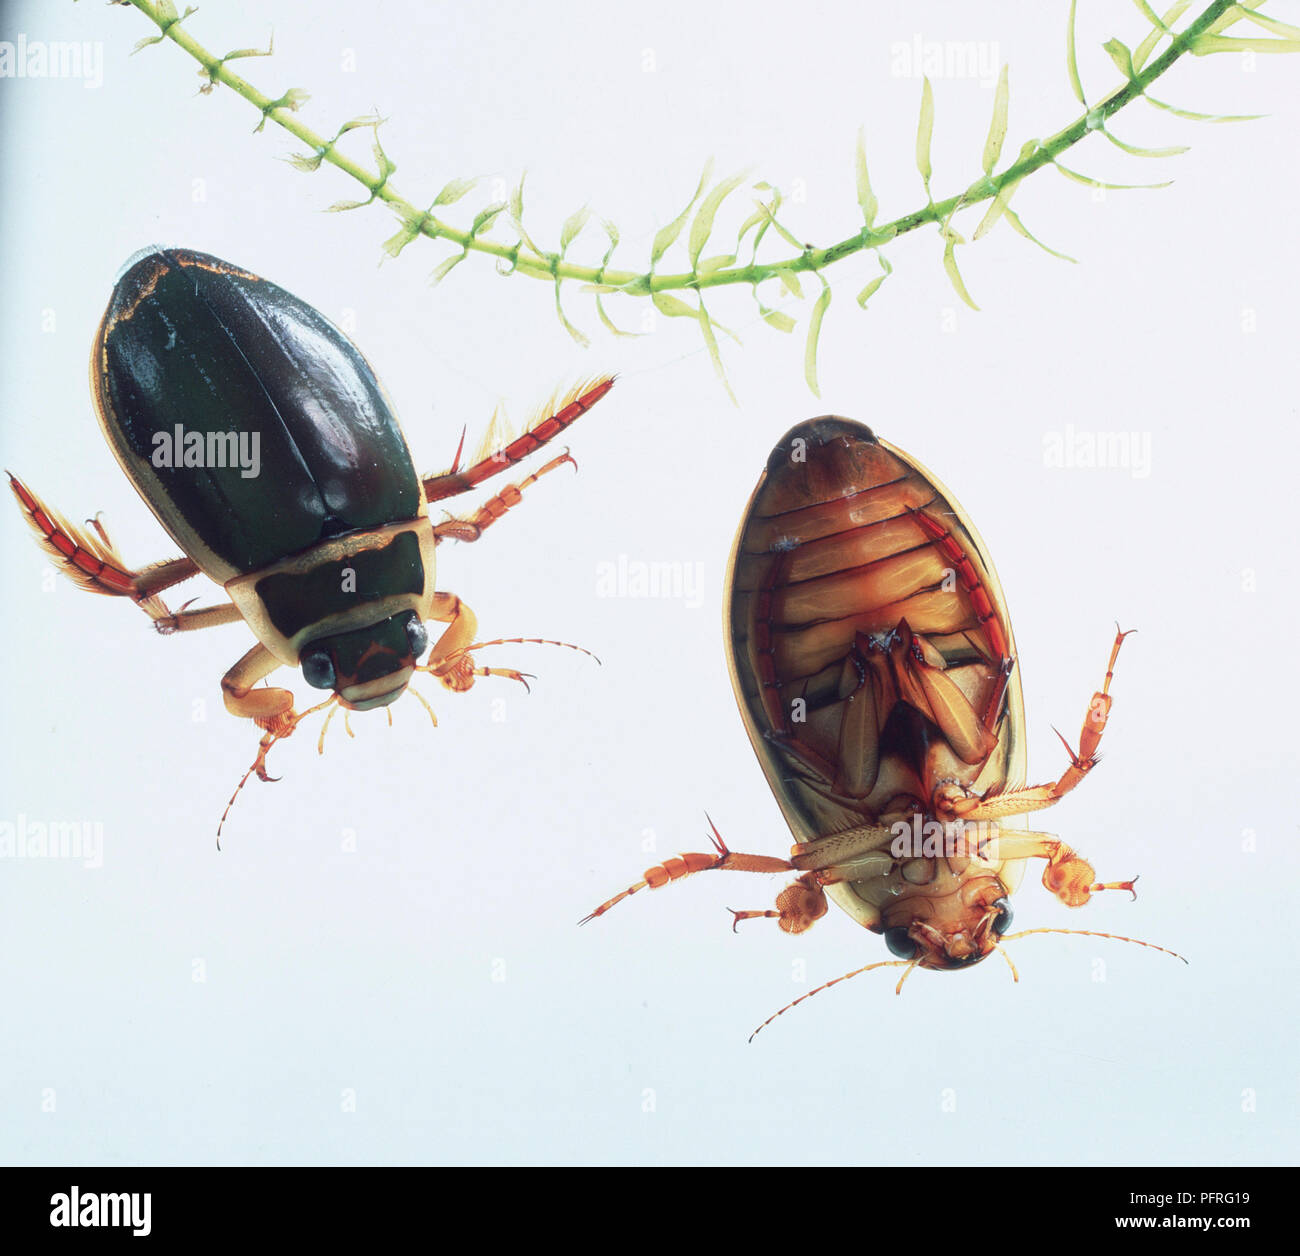 Two Great Diving Beetles (Dytiscus Marginalis) in water, close-up Stock Photo